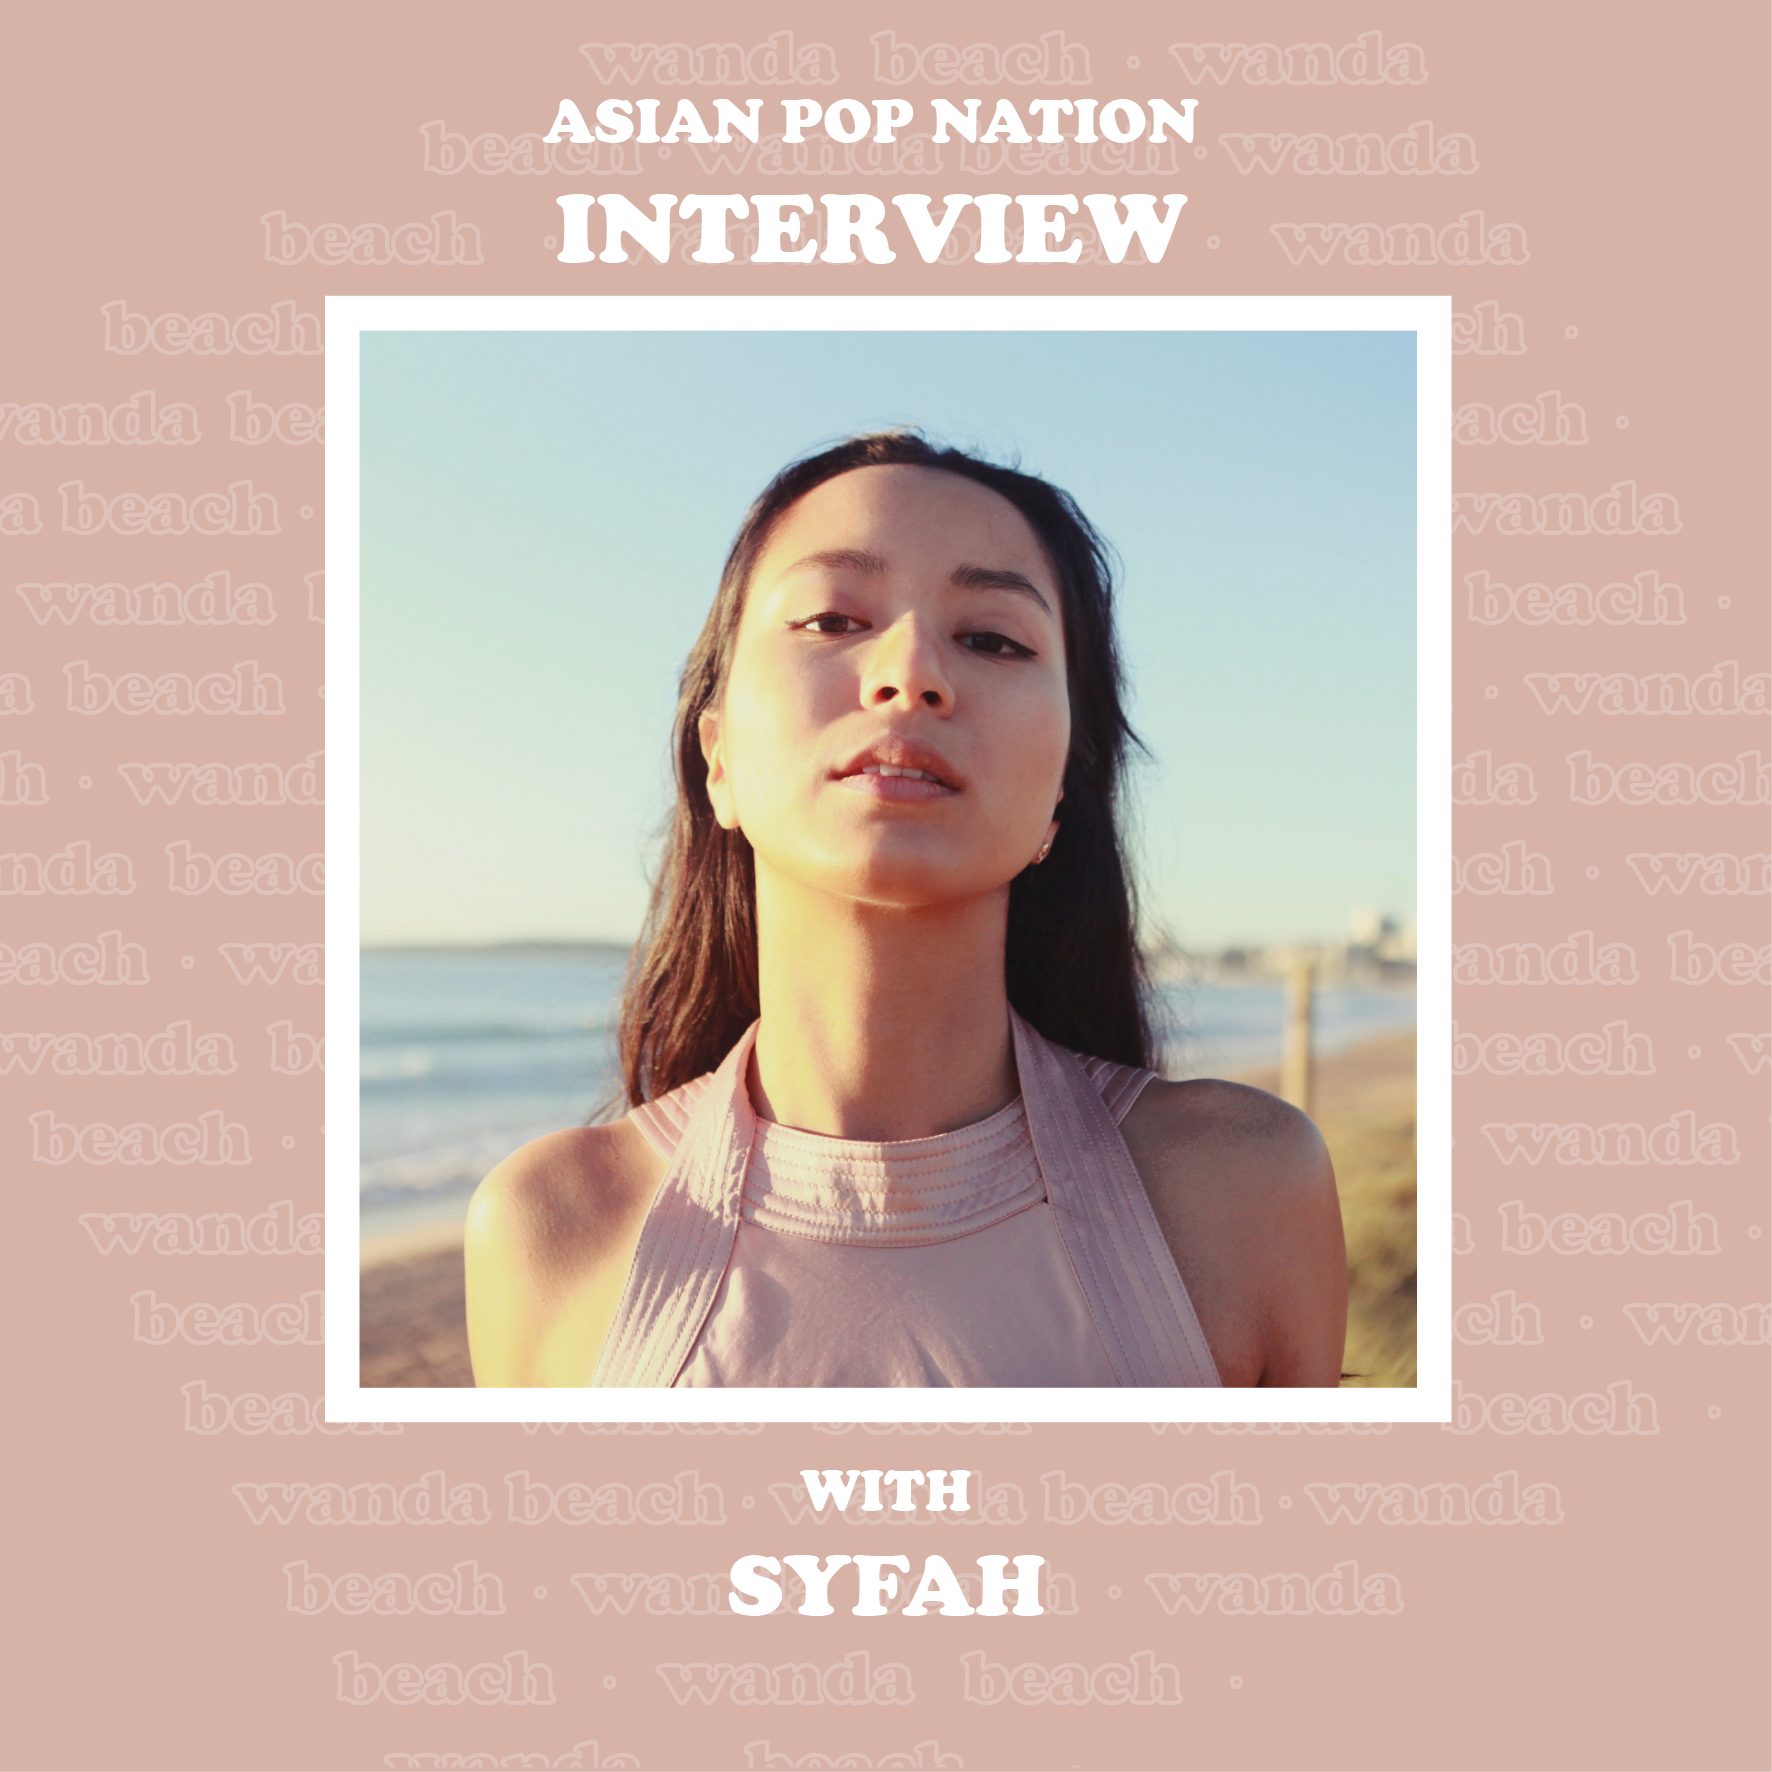 APN's Interview with SYFAH